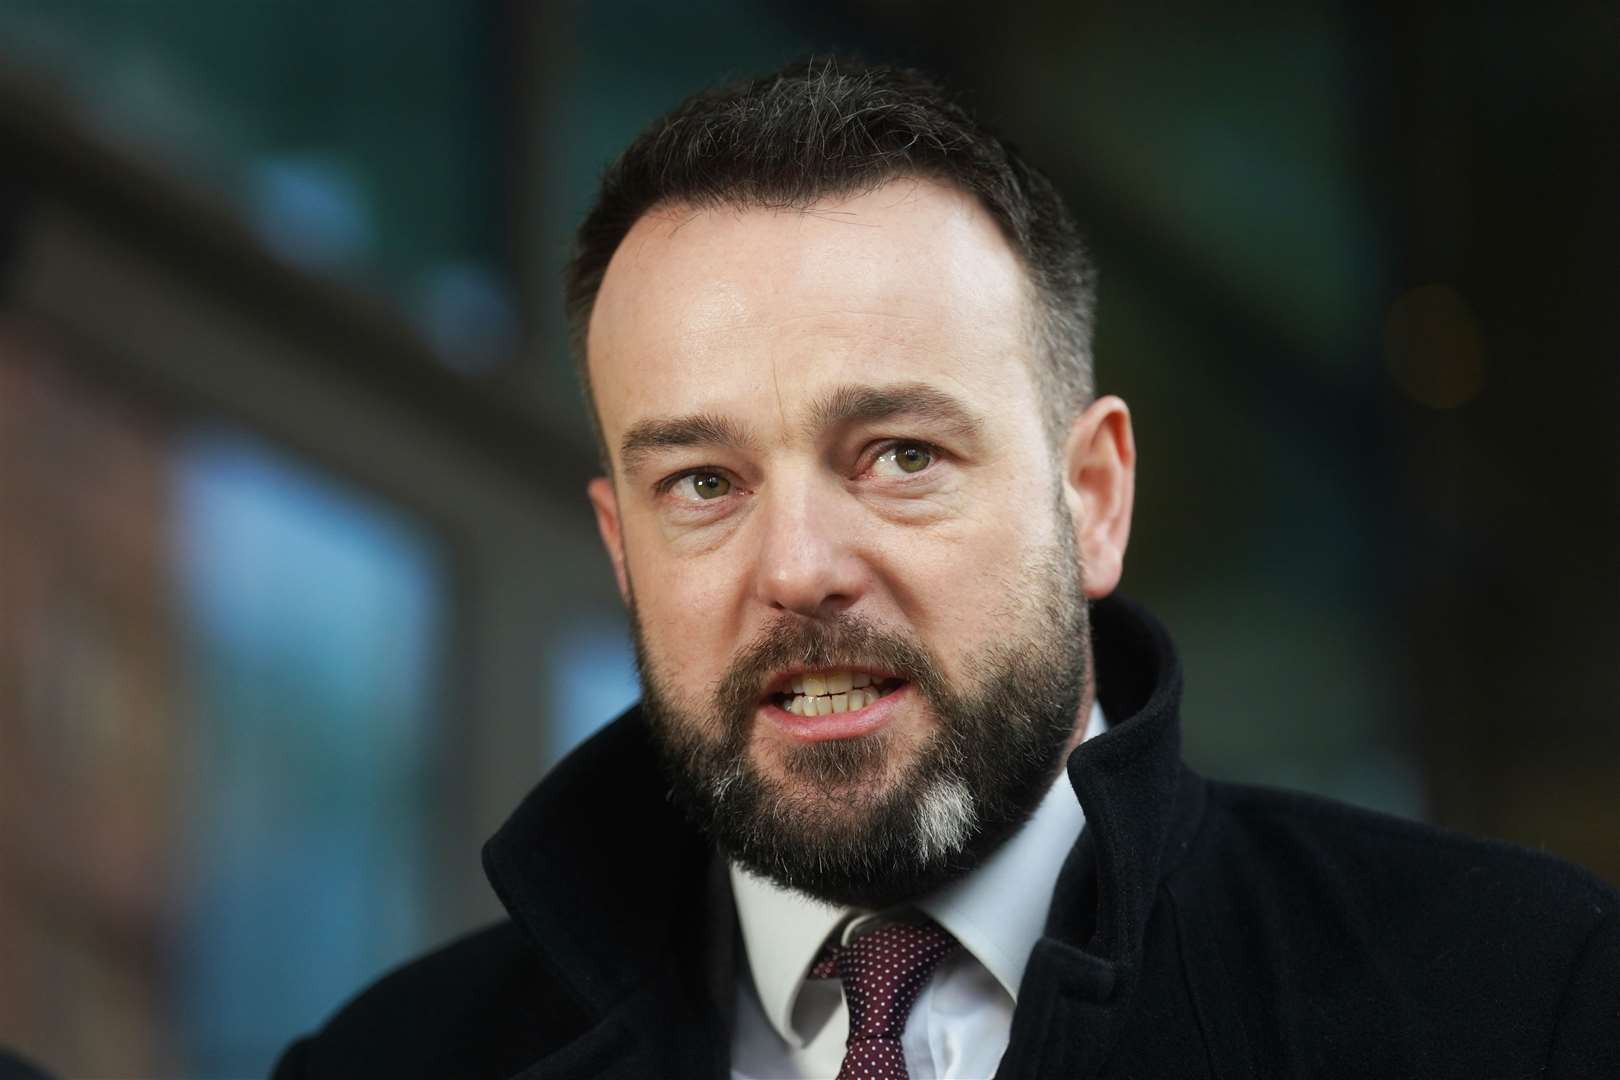 SDLP leader Colum Eastwood speaking to the media outside the Grand Central Hotel in Belfast following his meeting with Irish Foreign Affairs Minister and Tanaiste Micheal Martin. (Brian Lawless/PA)